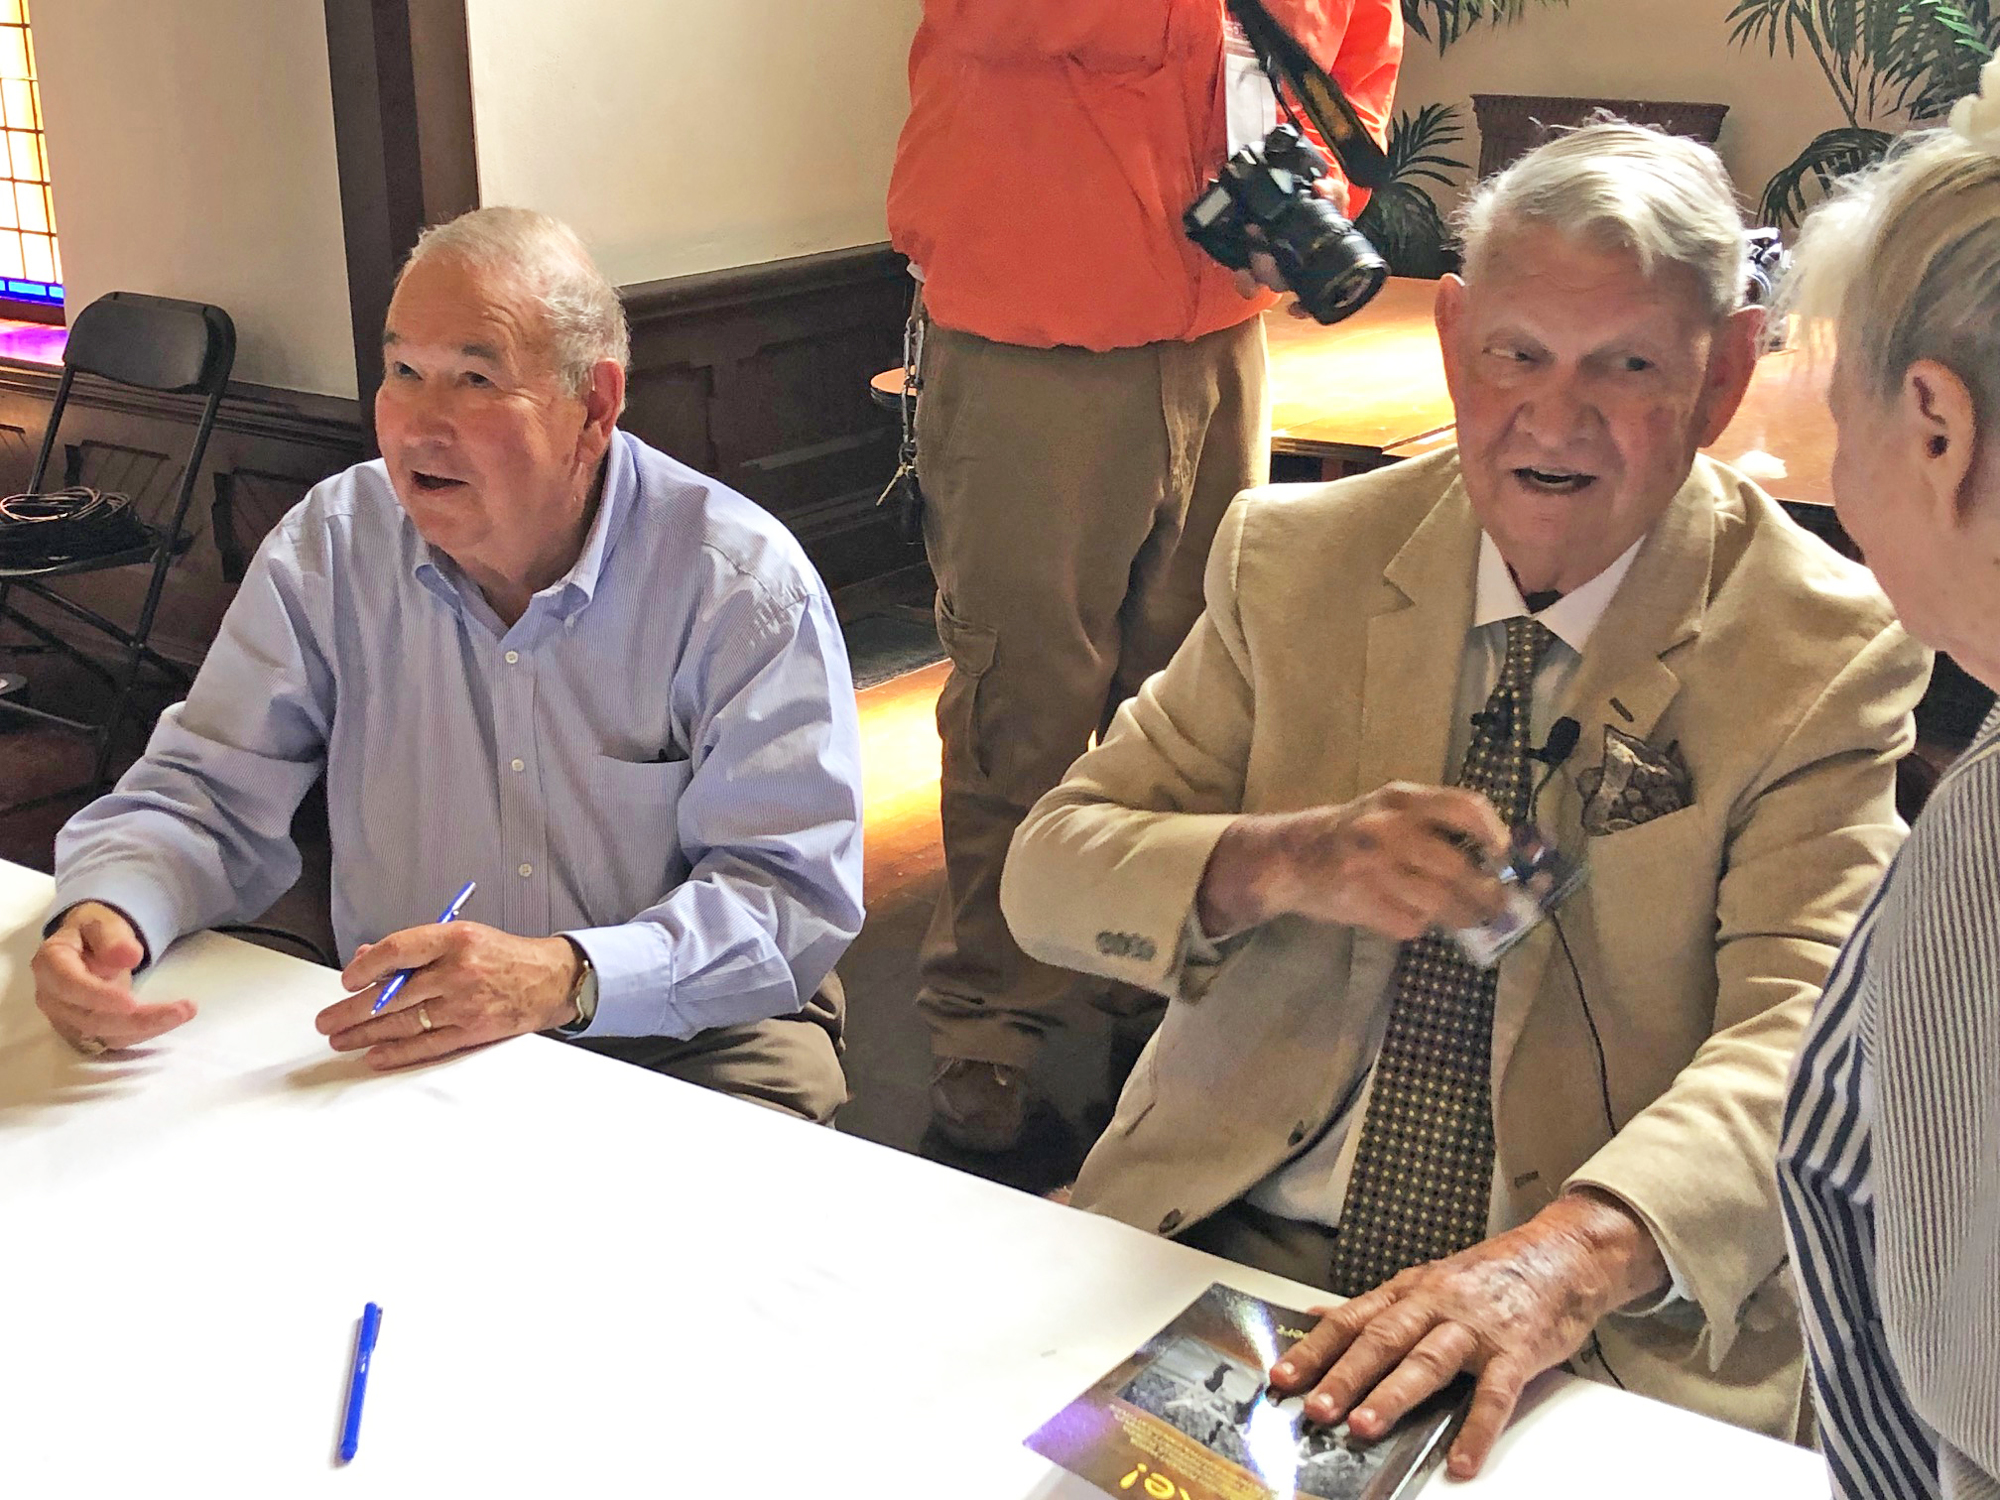 Author Mike Tolbert and former Mayor Jake Godbold greet supporters as they sign books at at Old St. Andrews Church.